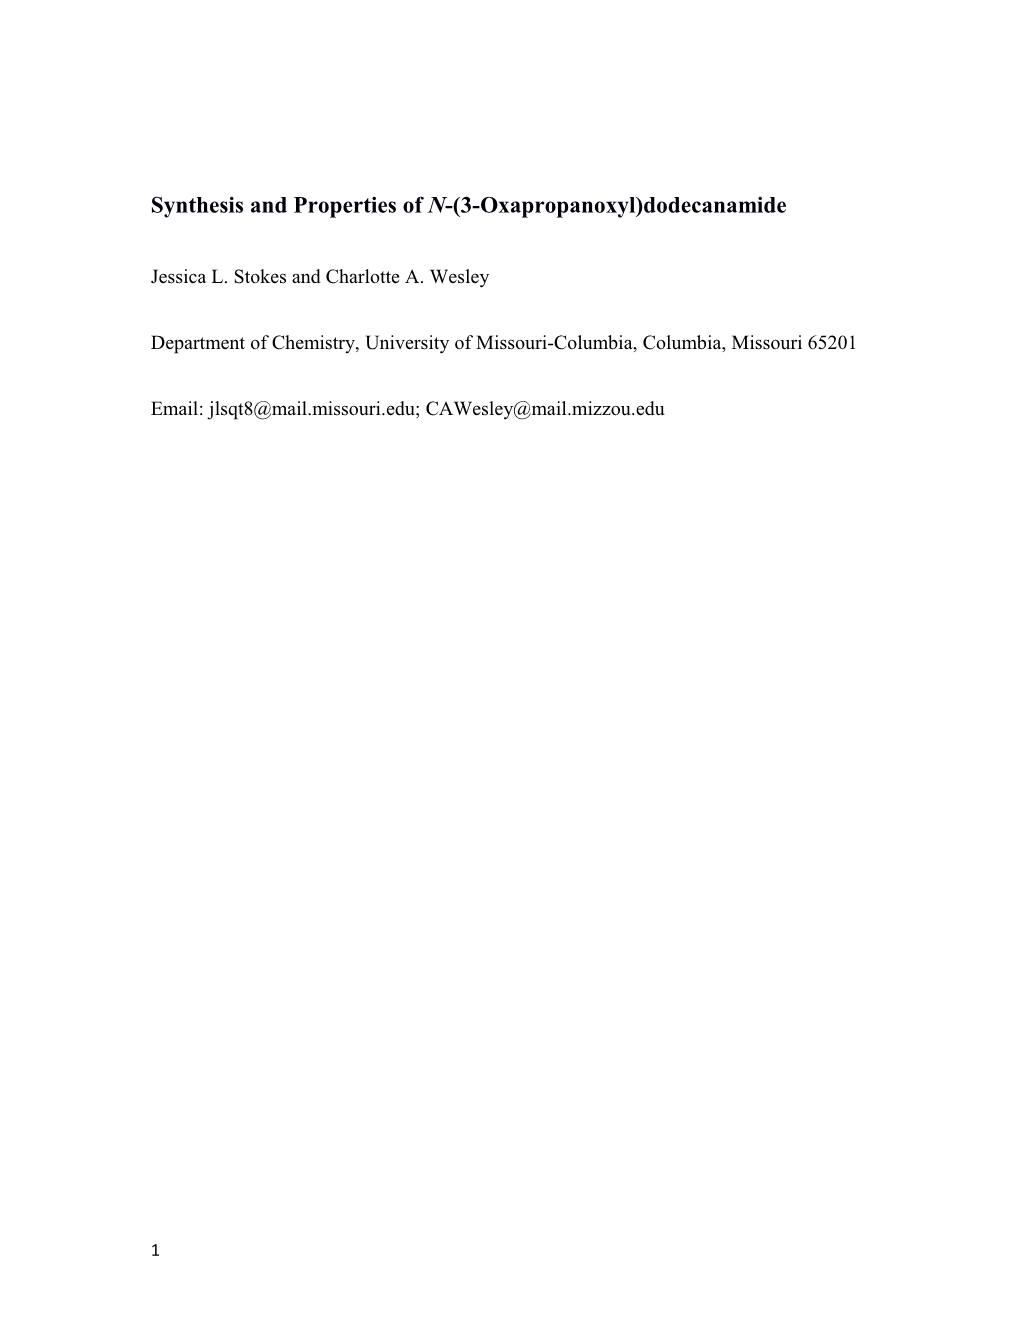 Synthesis and Properties of N-(3-Oxapropanoxyl)Dodecanamide